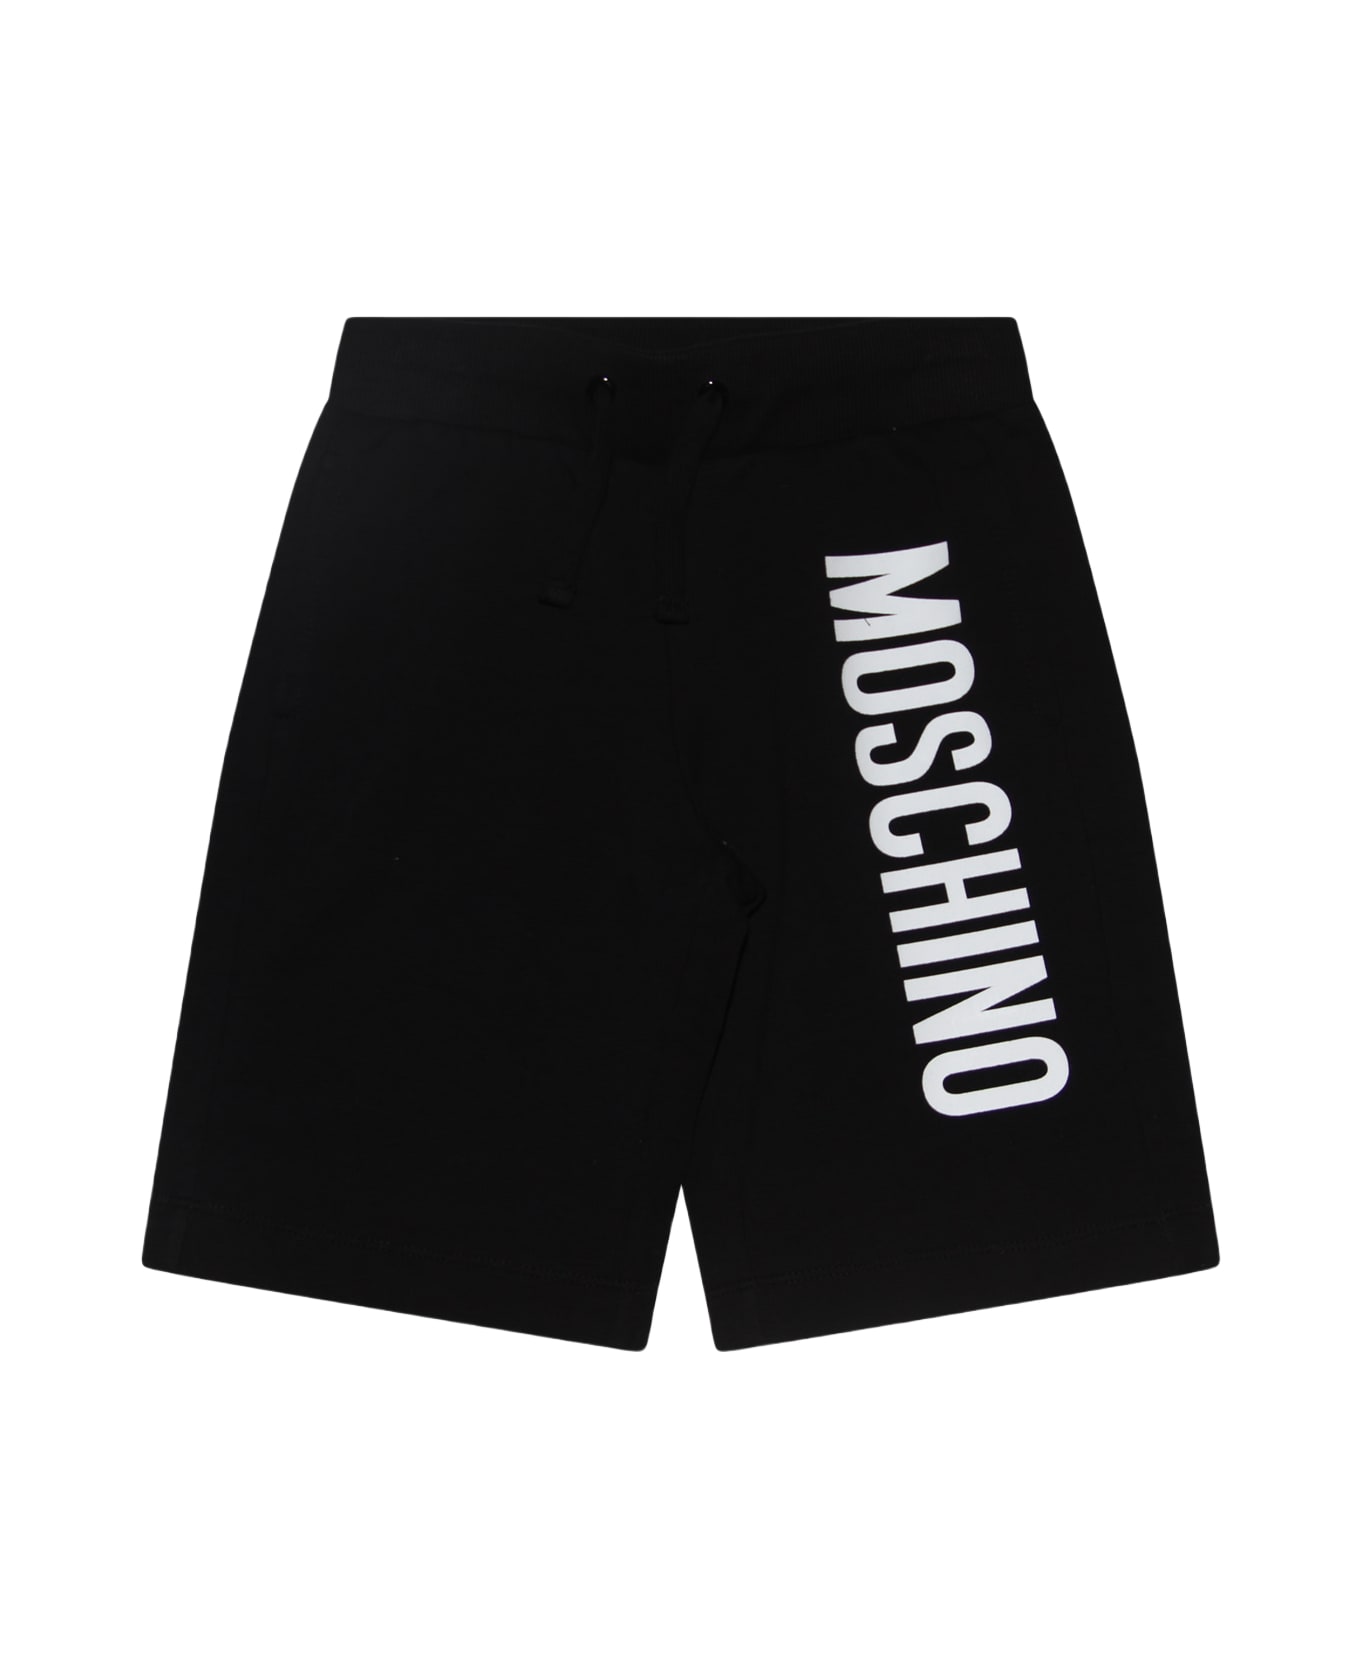 Moschino Black And White Cotton Blend Track Shorts - Black ボトムス